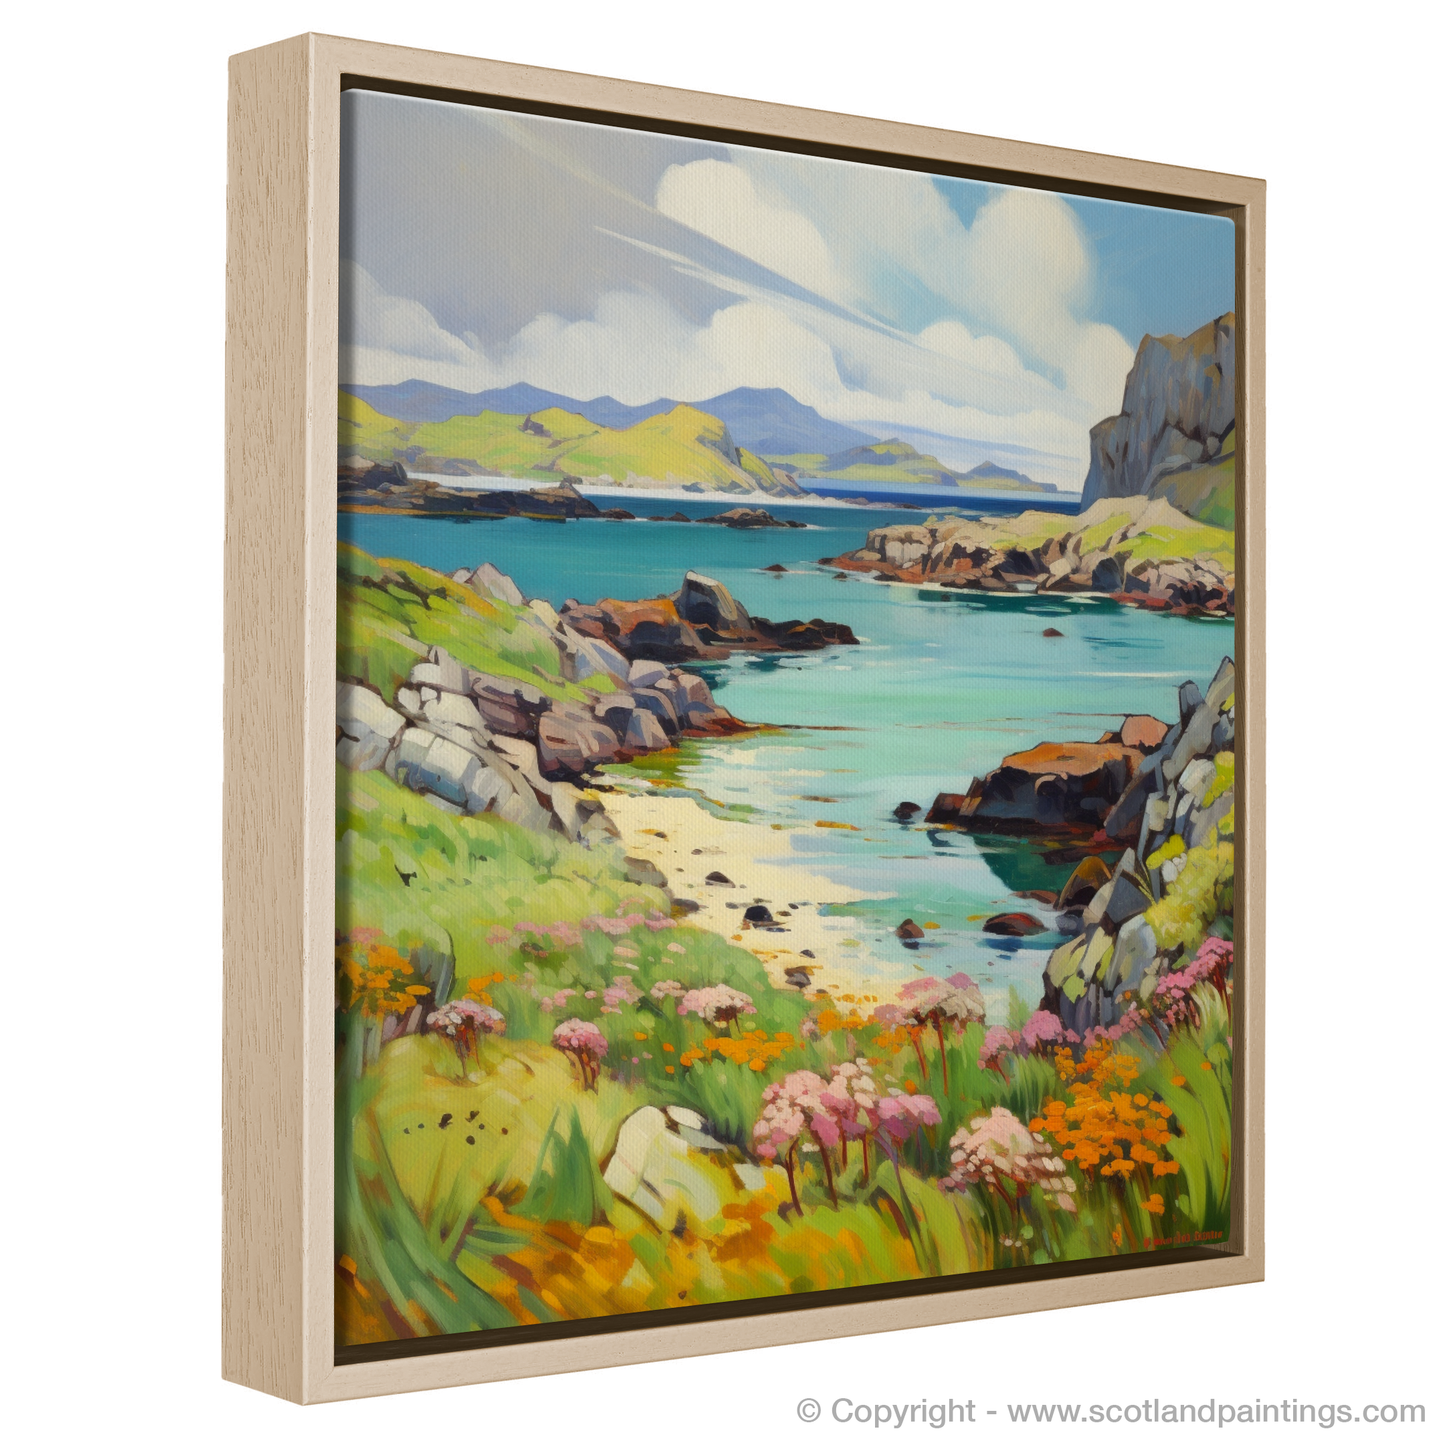 Painting and Art Print of Isle of Mull, Inner Hebrides in summer entitled "Isle of Mull Summer Radiance".